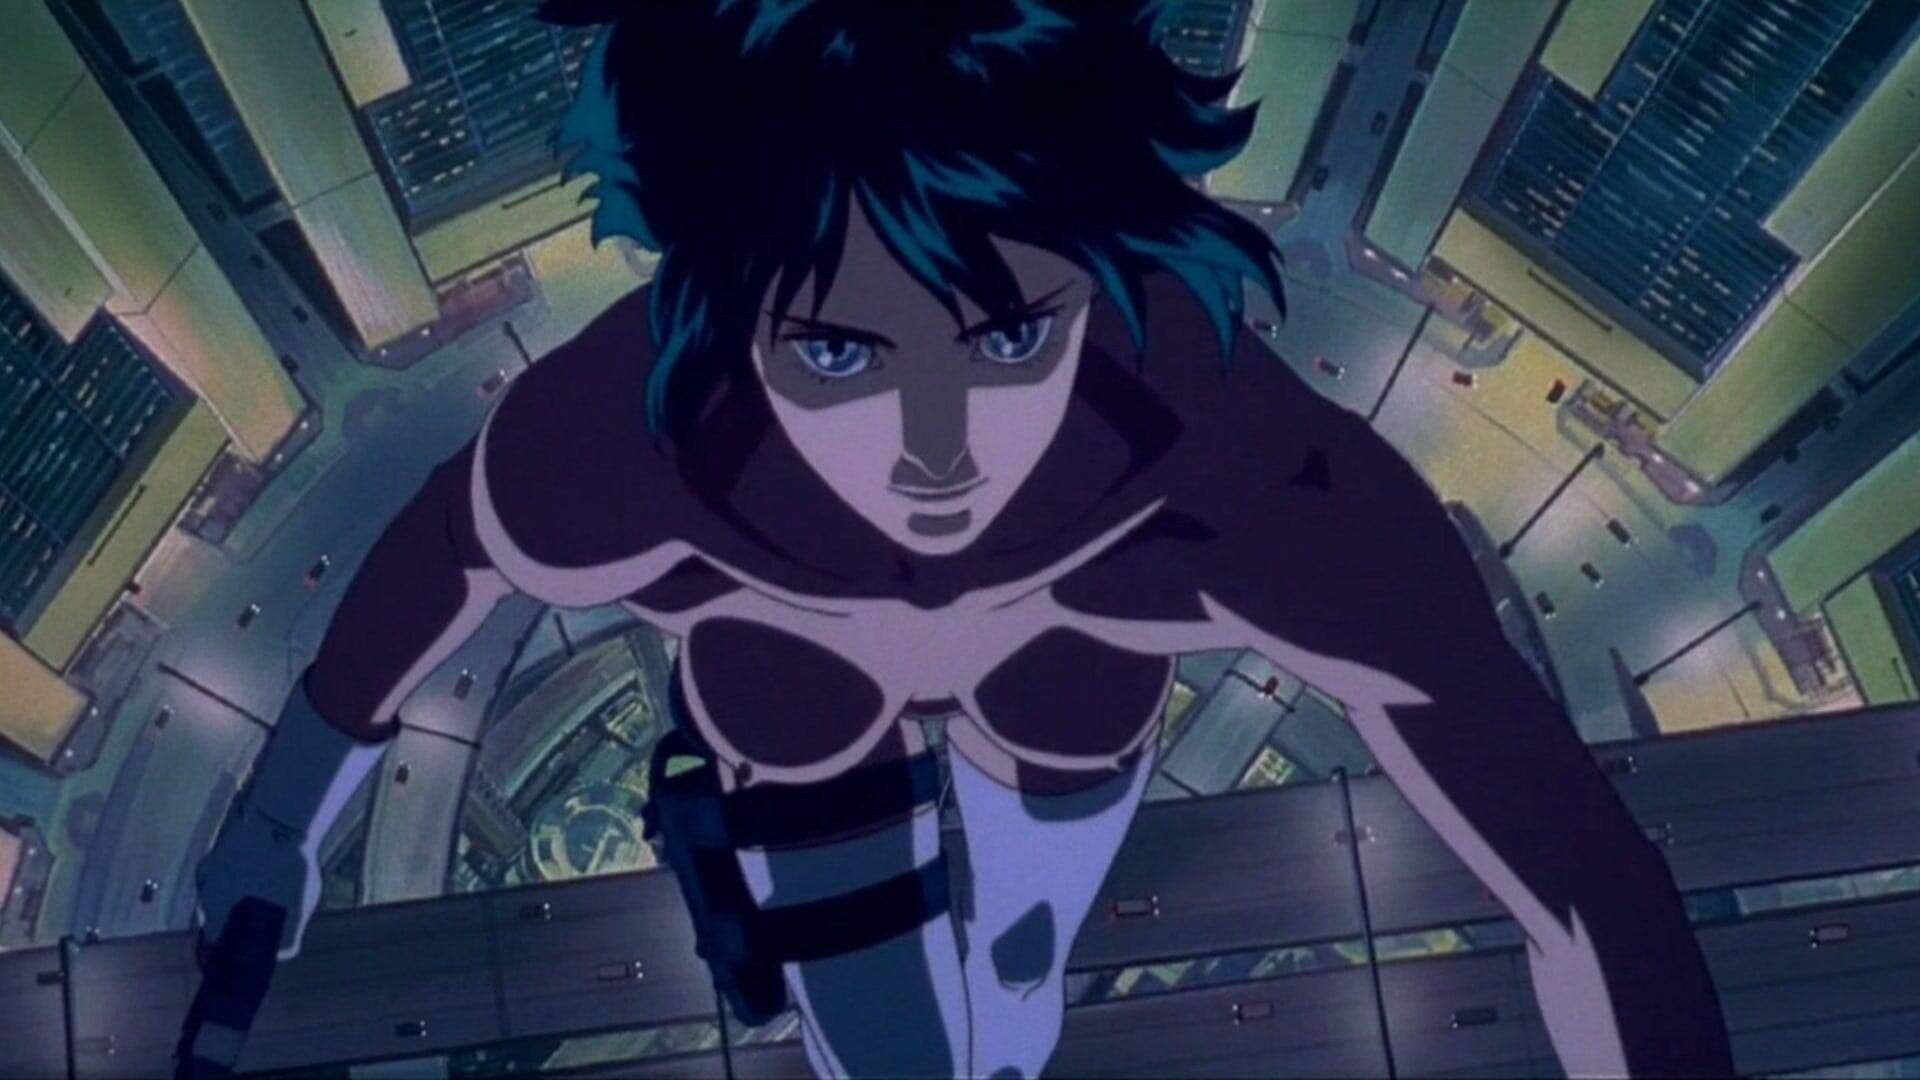 Ghost in the Shell (Anime): A 1995 adult animated neo-noir cyberpunk thriller film adapted by Kazunori Ito. 1920x1080 Full HD Wallpaper.